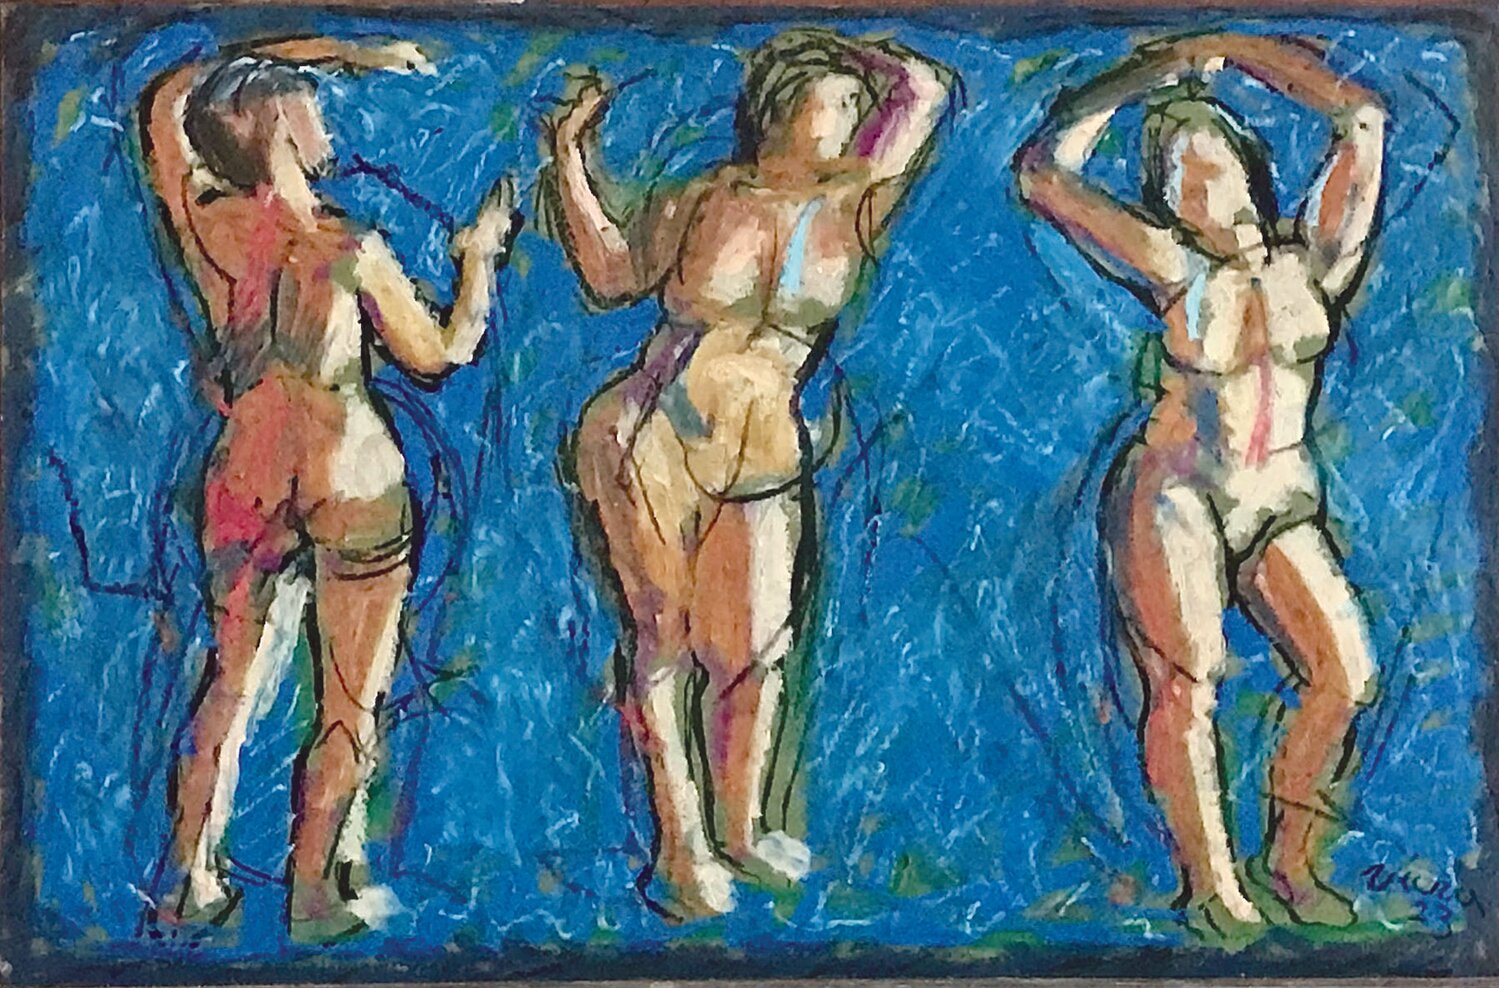 “Dance of the Three Graces: March” is a pastel work by Charles David Viera.